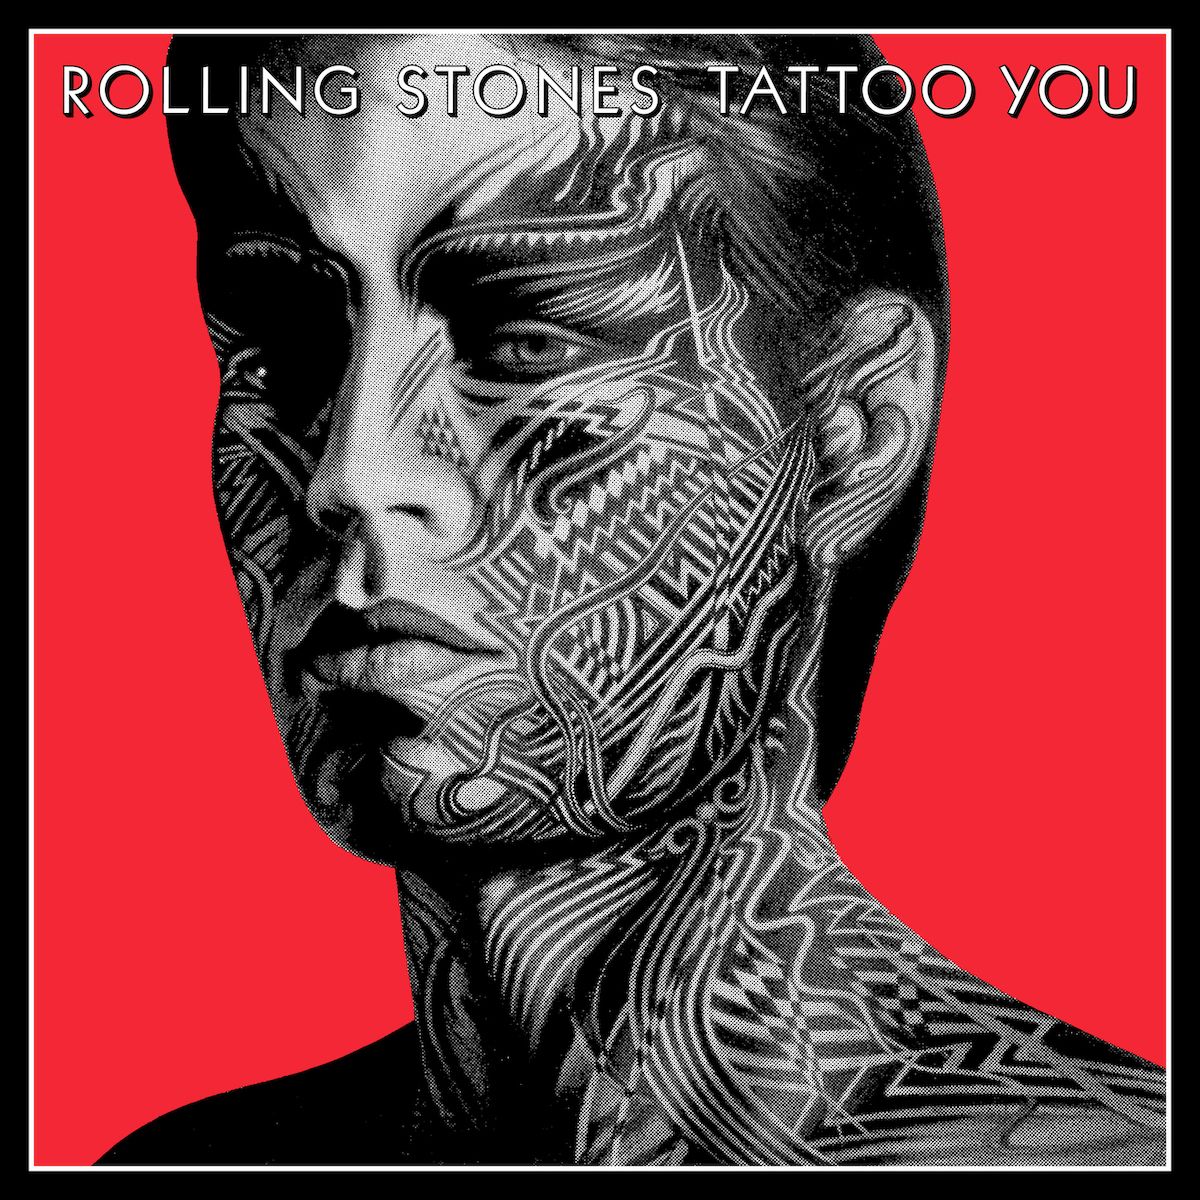 Rolling Stones - Tattoo You (40th Anniversary Deluxe Ed. 2CD remastered reissue) - CD - New